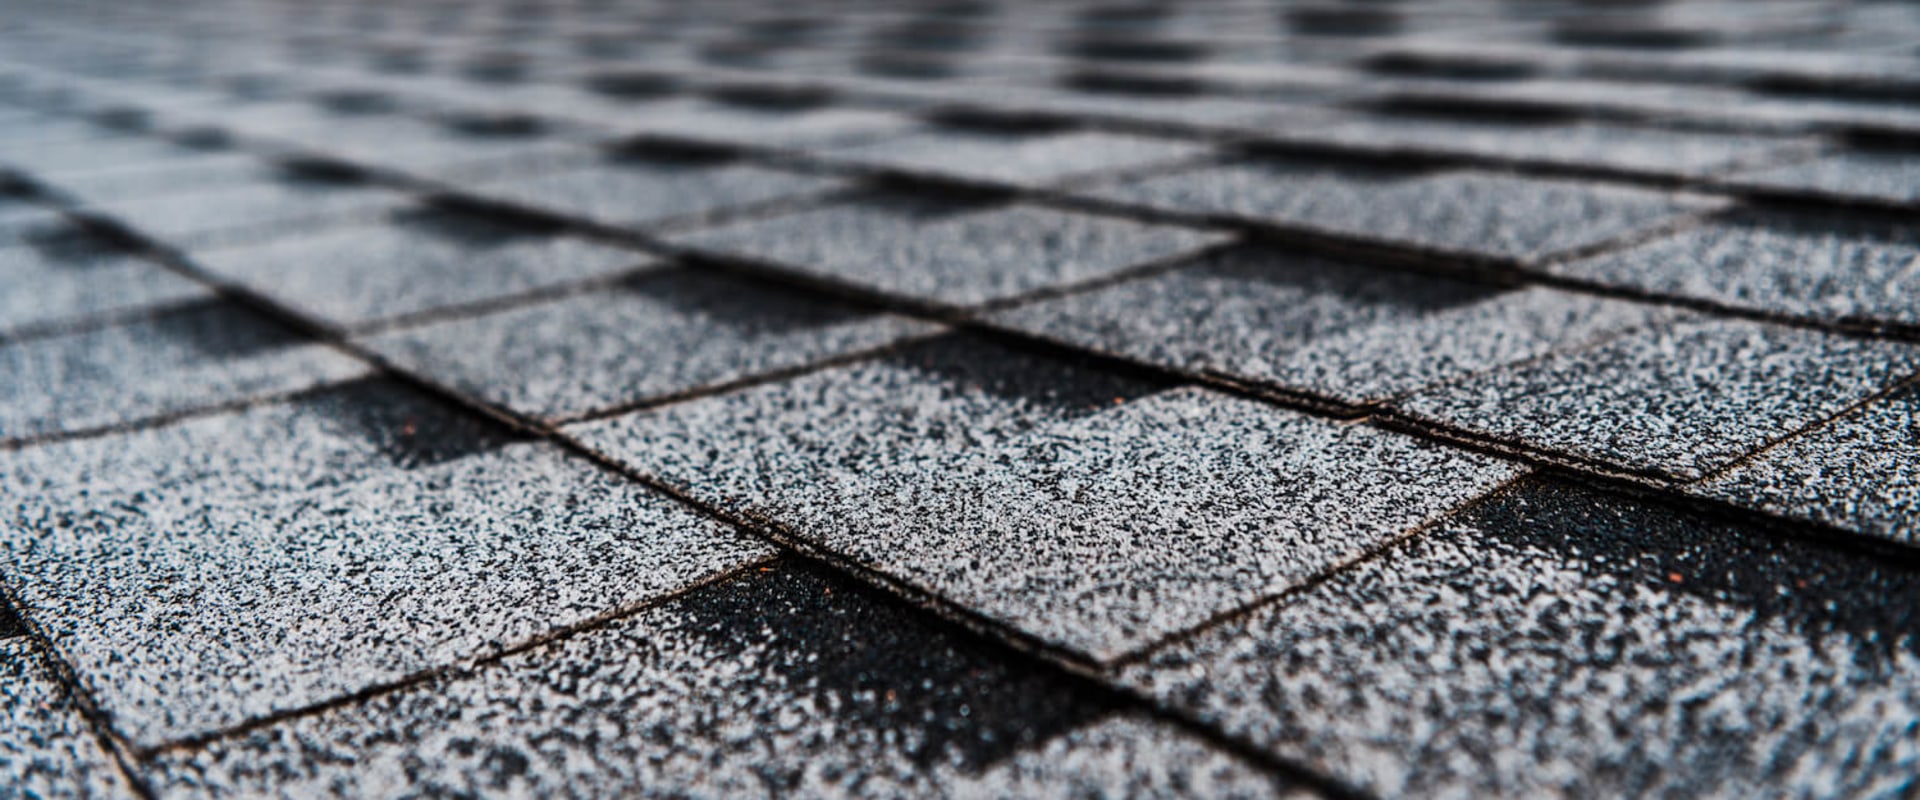 The Importance of Regular Roof Inspections and Maintenance